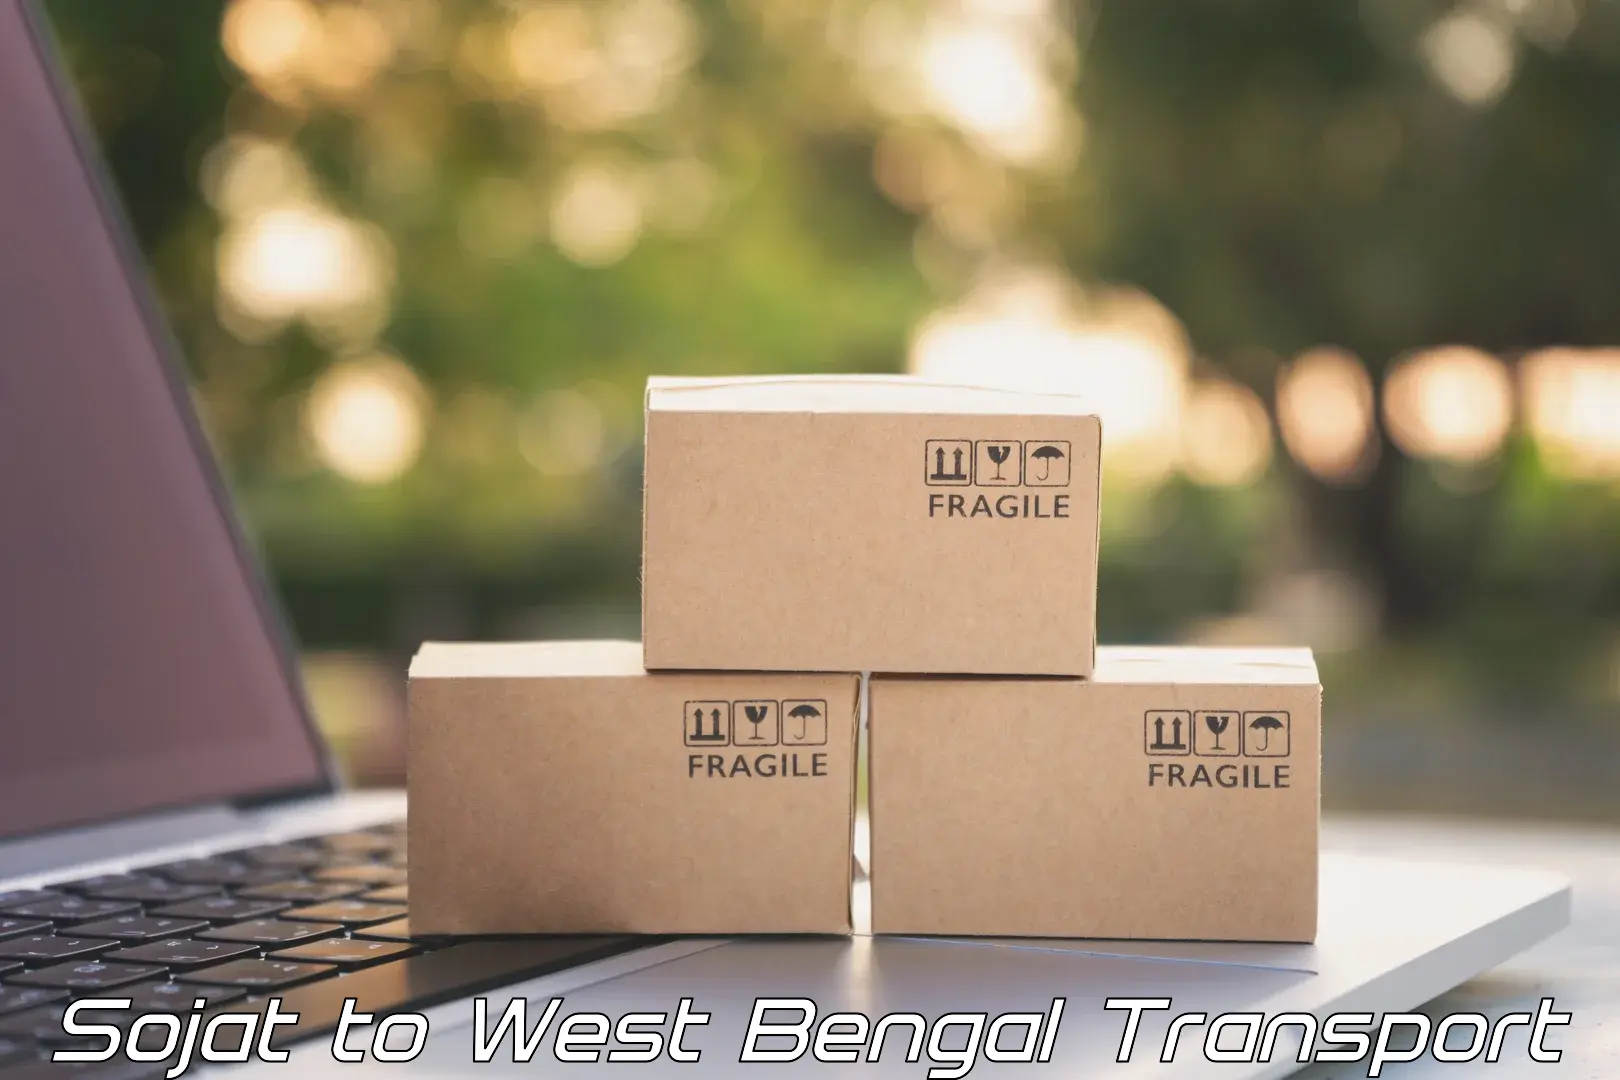 Commercial transport service Sojat to West Bengal